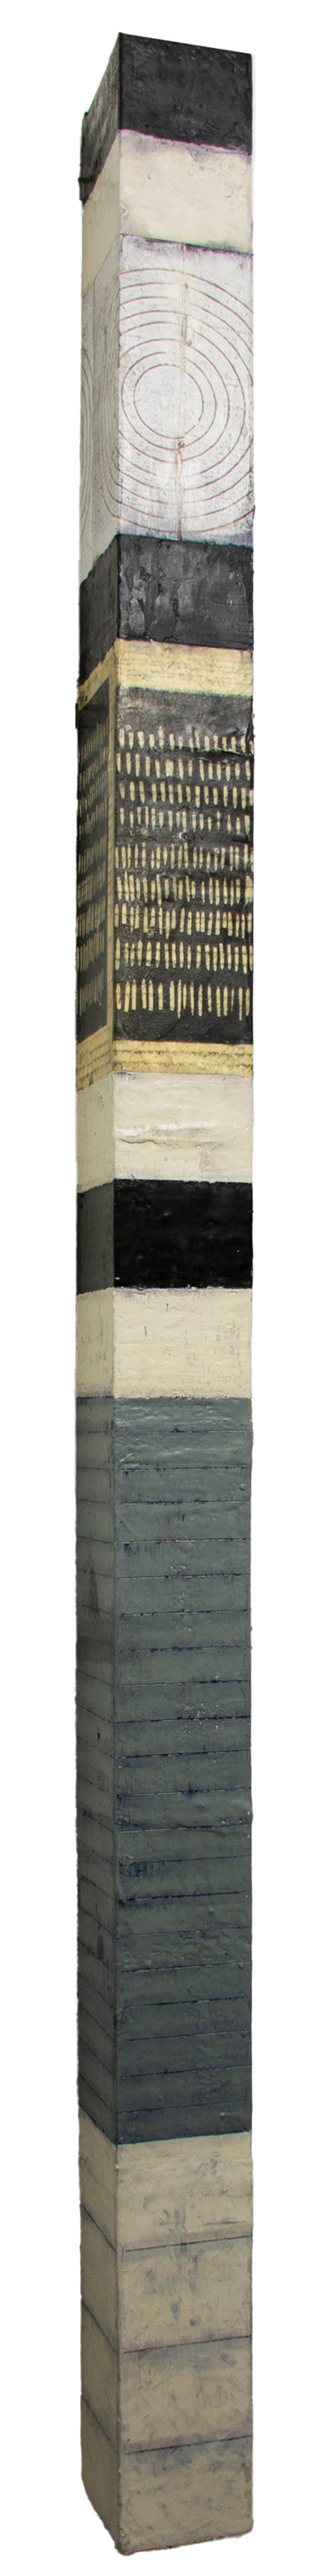 Wall Column-Black, white and grey